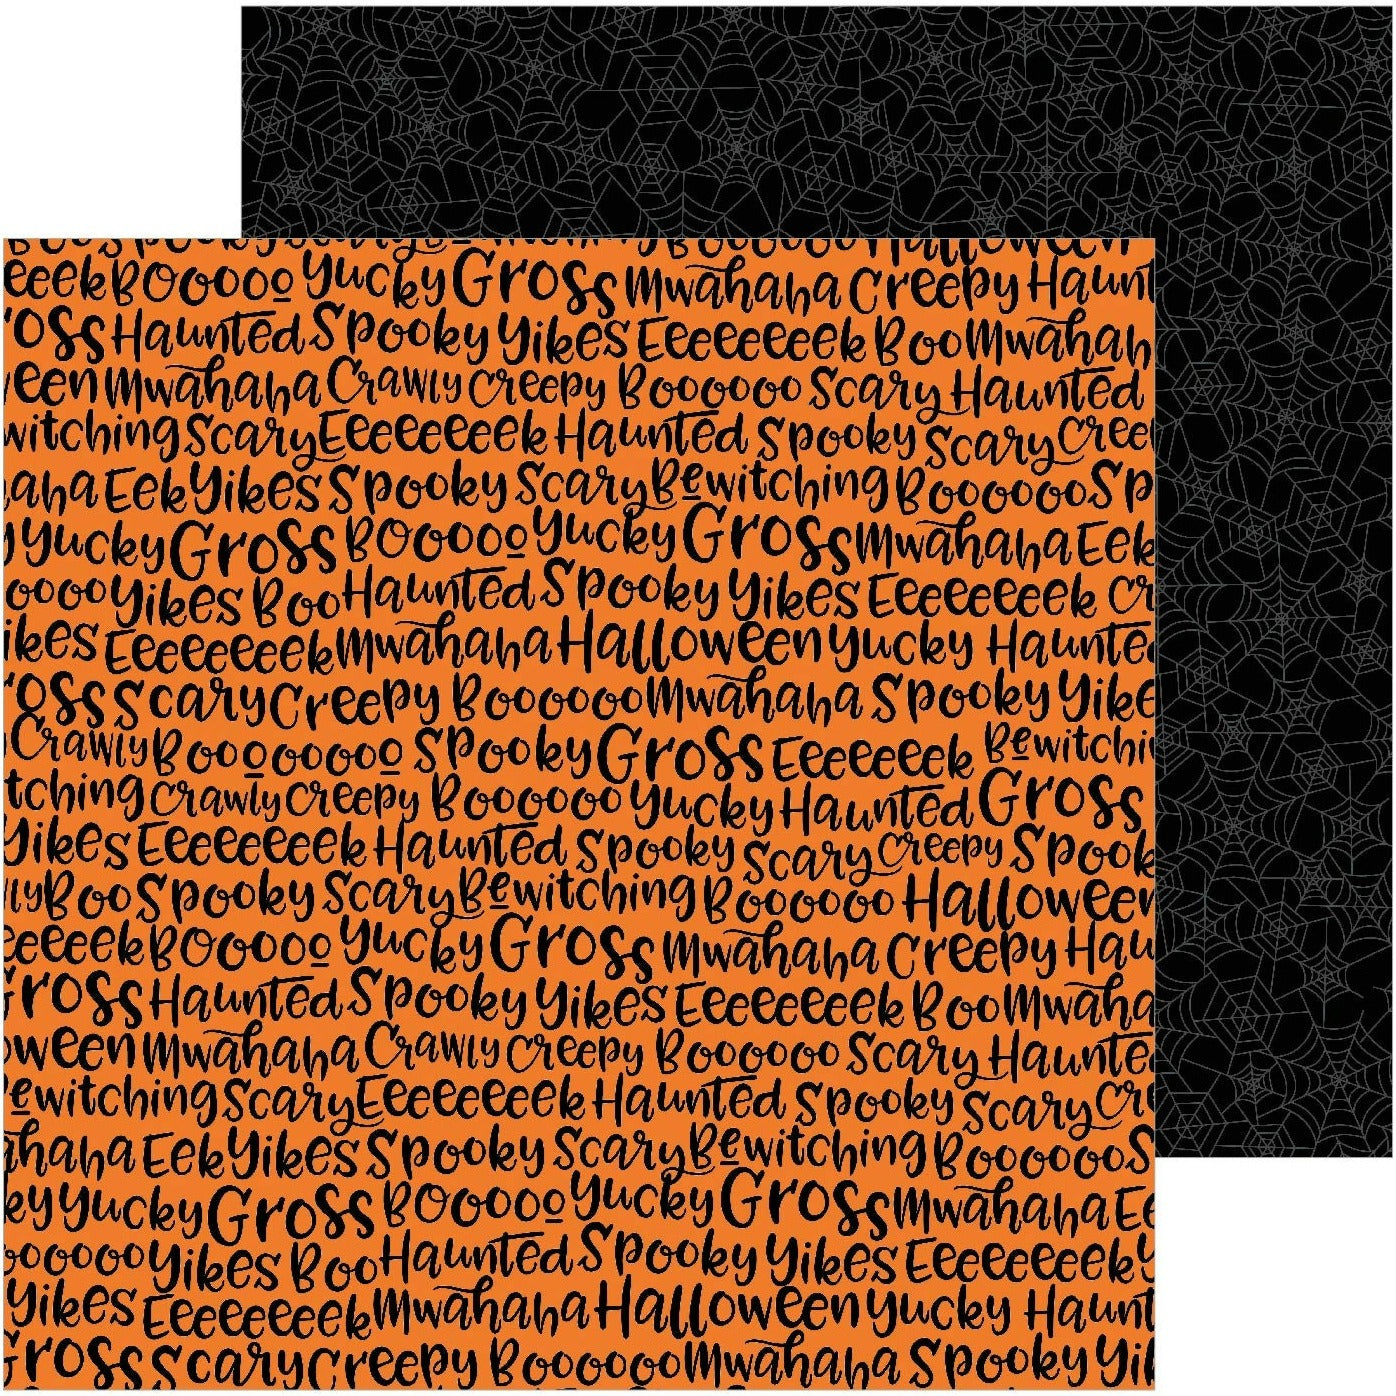 (spooky Halloween words on an orange background - spiderweb reverse) - on double-sided 12x12 cardstock. From Pebbles.